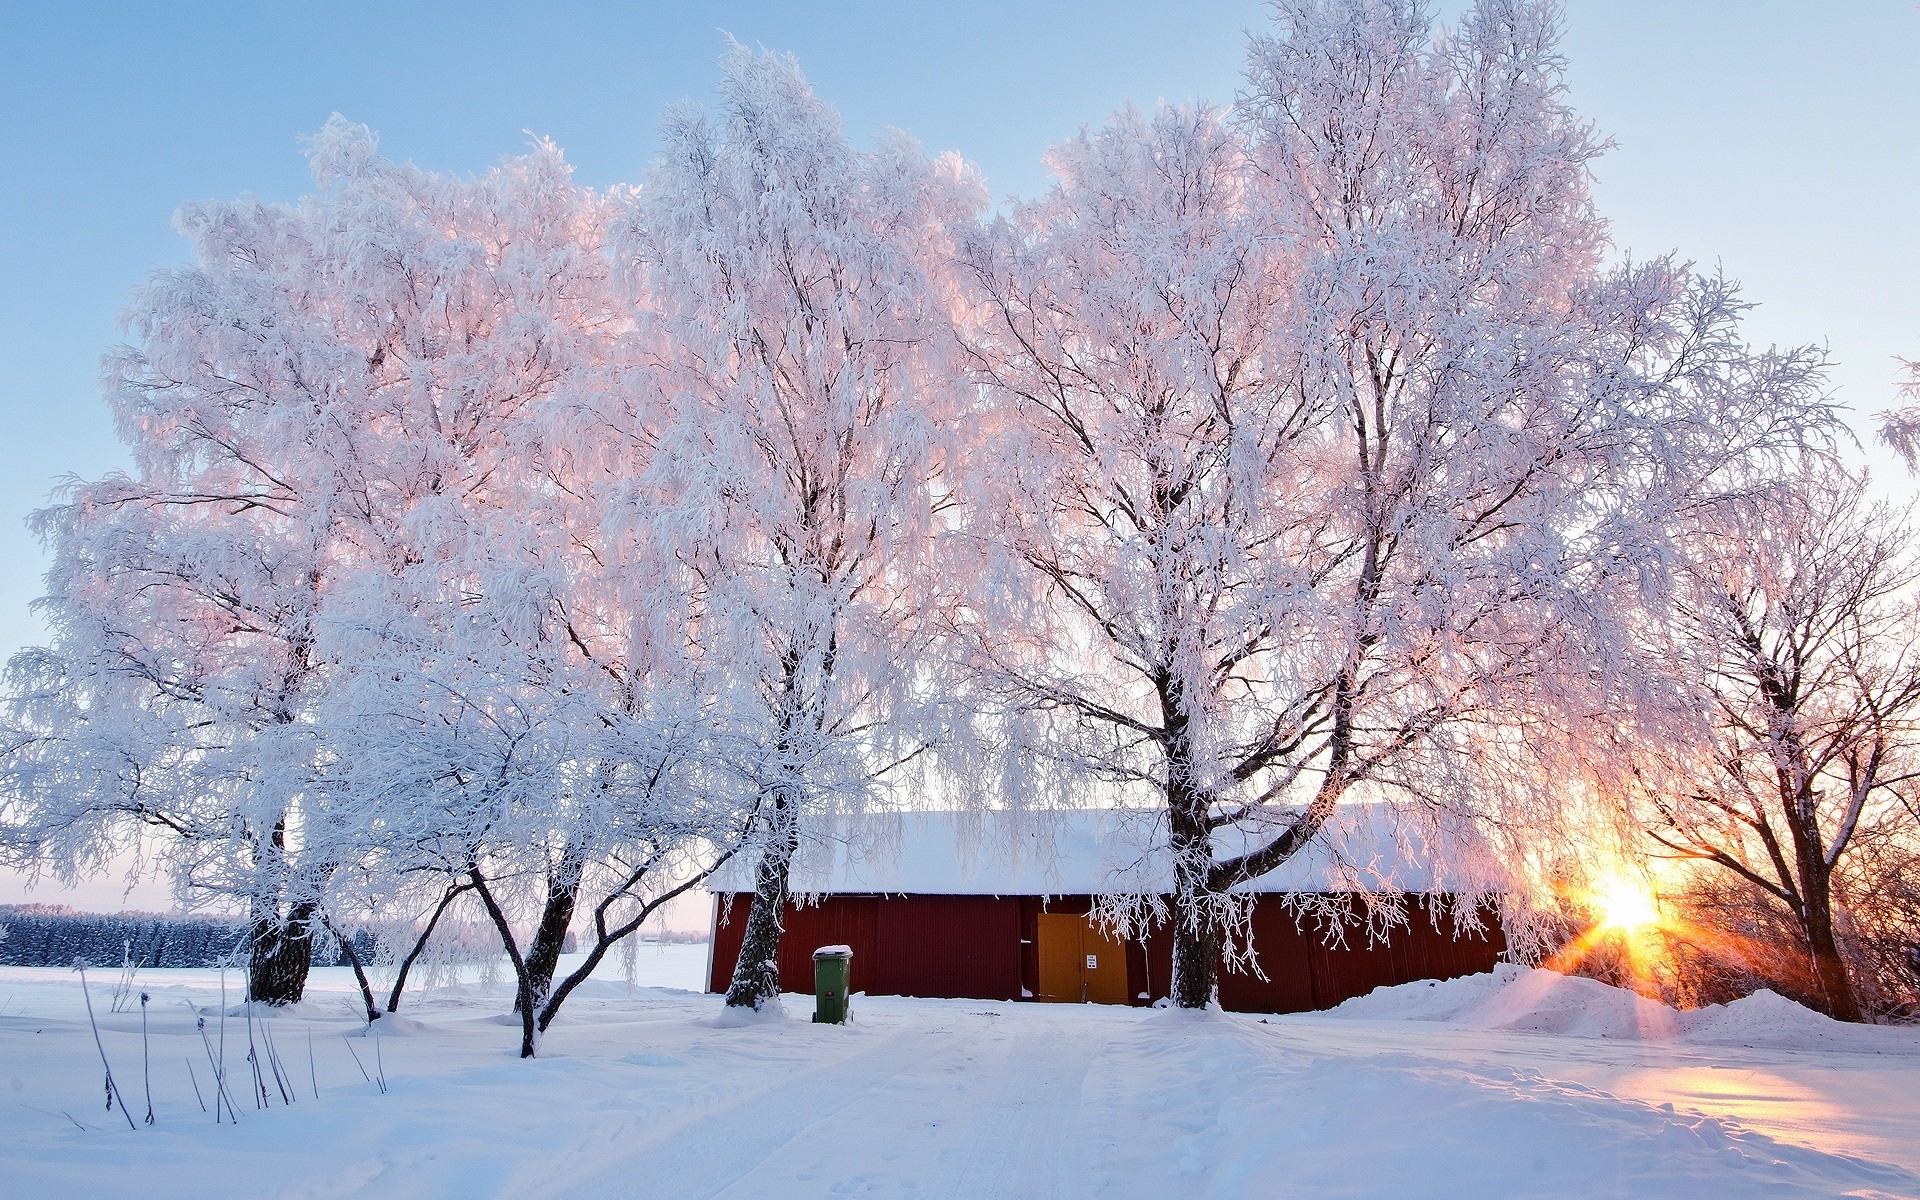 Capturing the Enchantment of Winter: A Snow-Covered Village Basks in ...